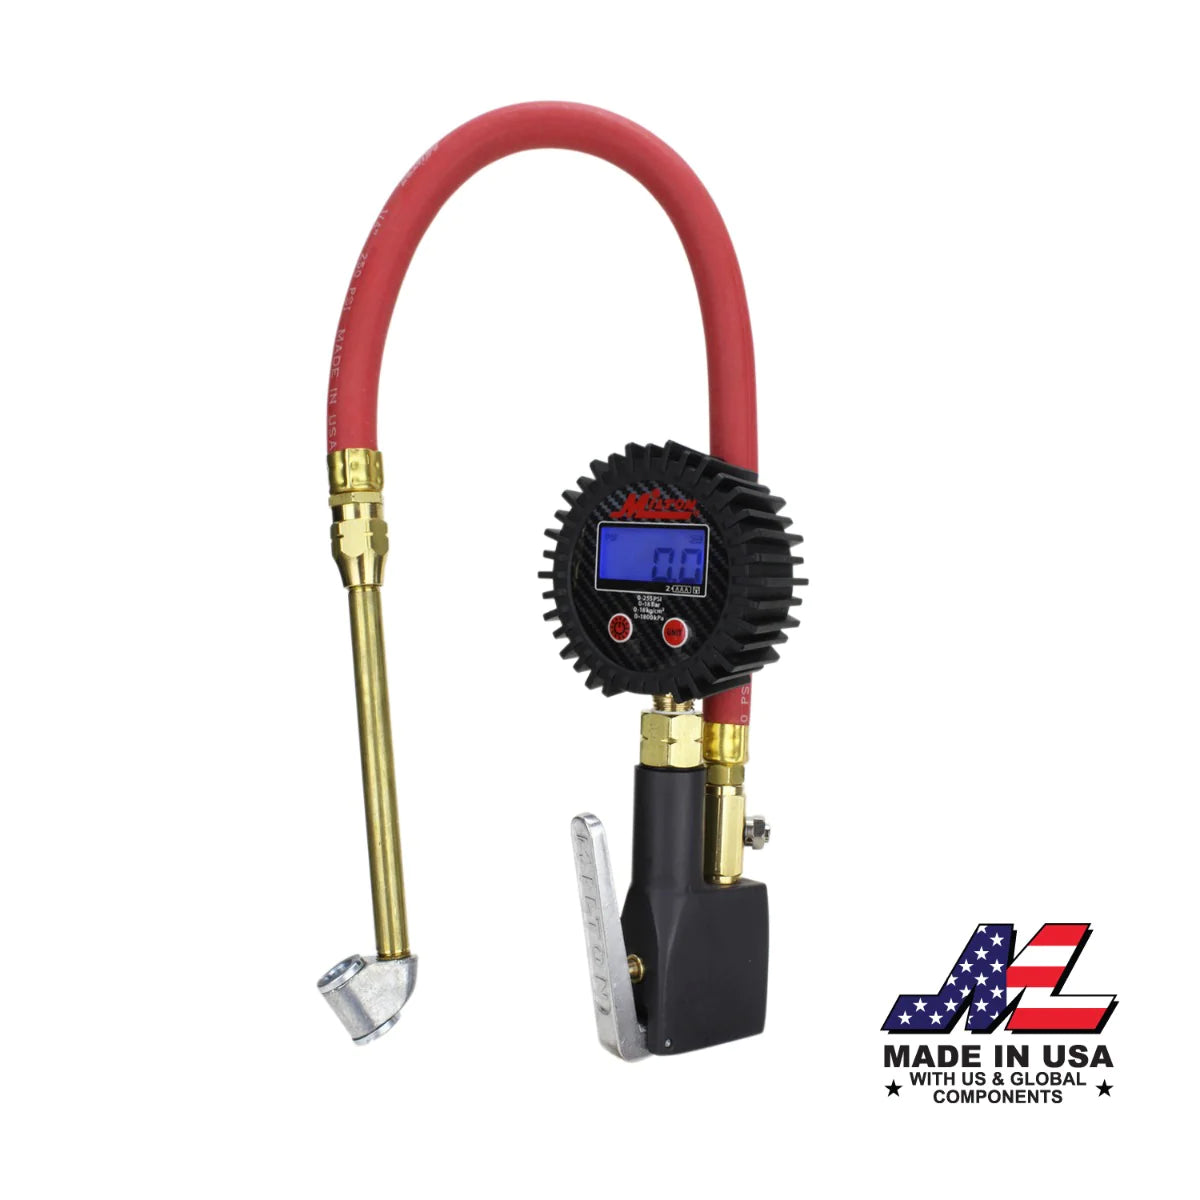 Compact Digital Tire Inflator with Pressure Gauge (255 PSI) - Air Chuck & 15" Rubber Air hose 1/4" NPT